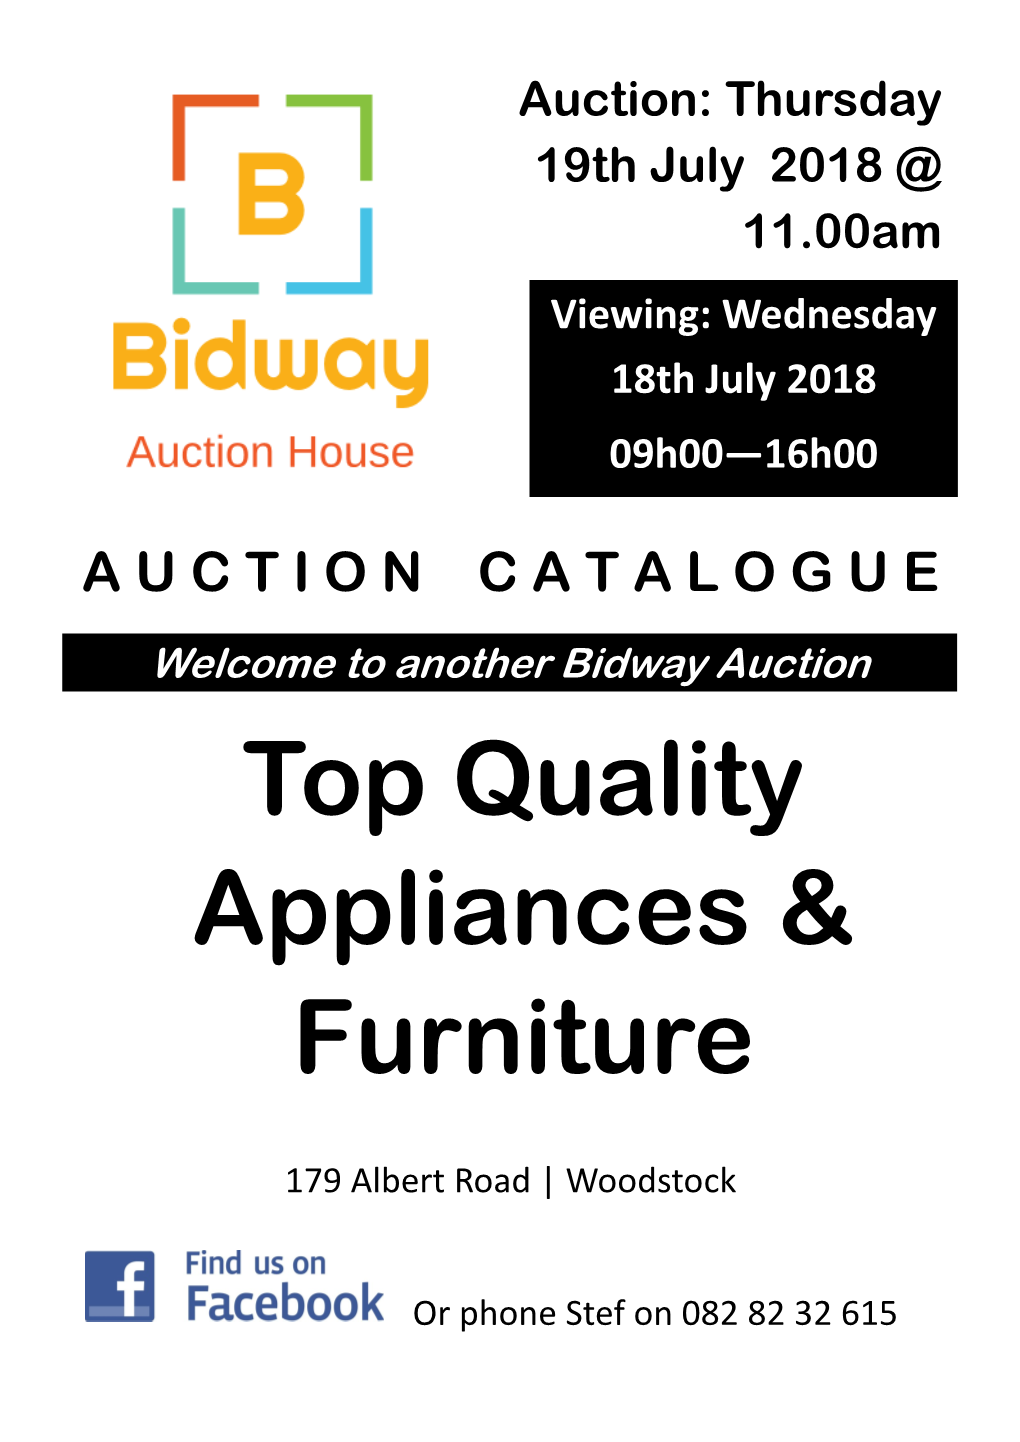 Top Quality Appliances & Furniture